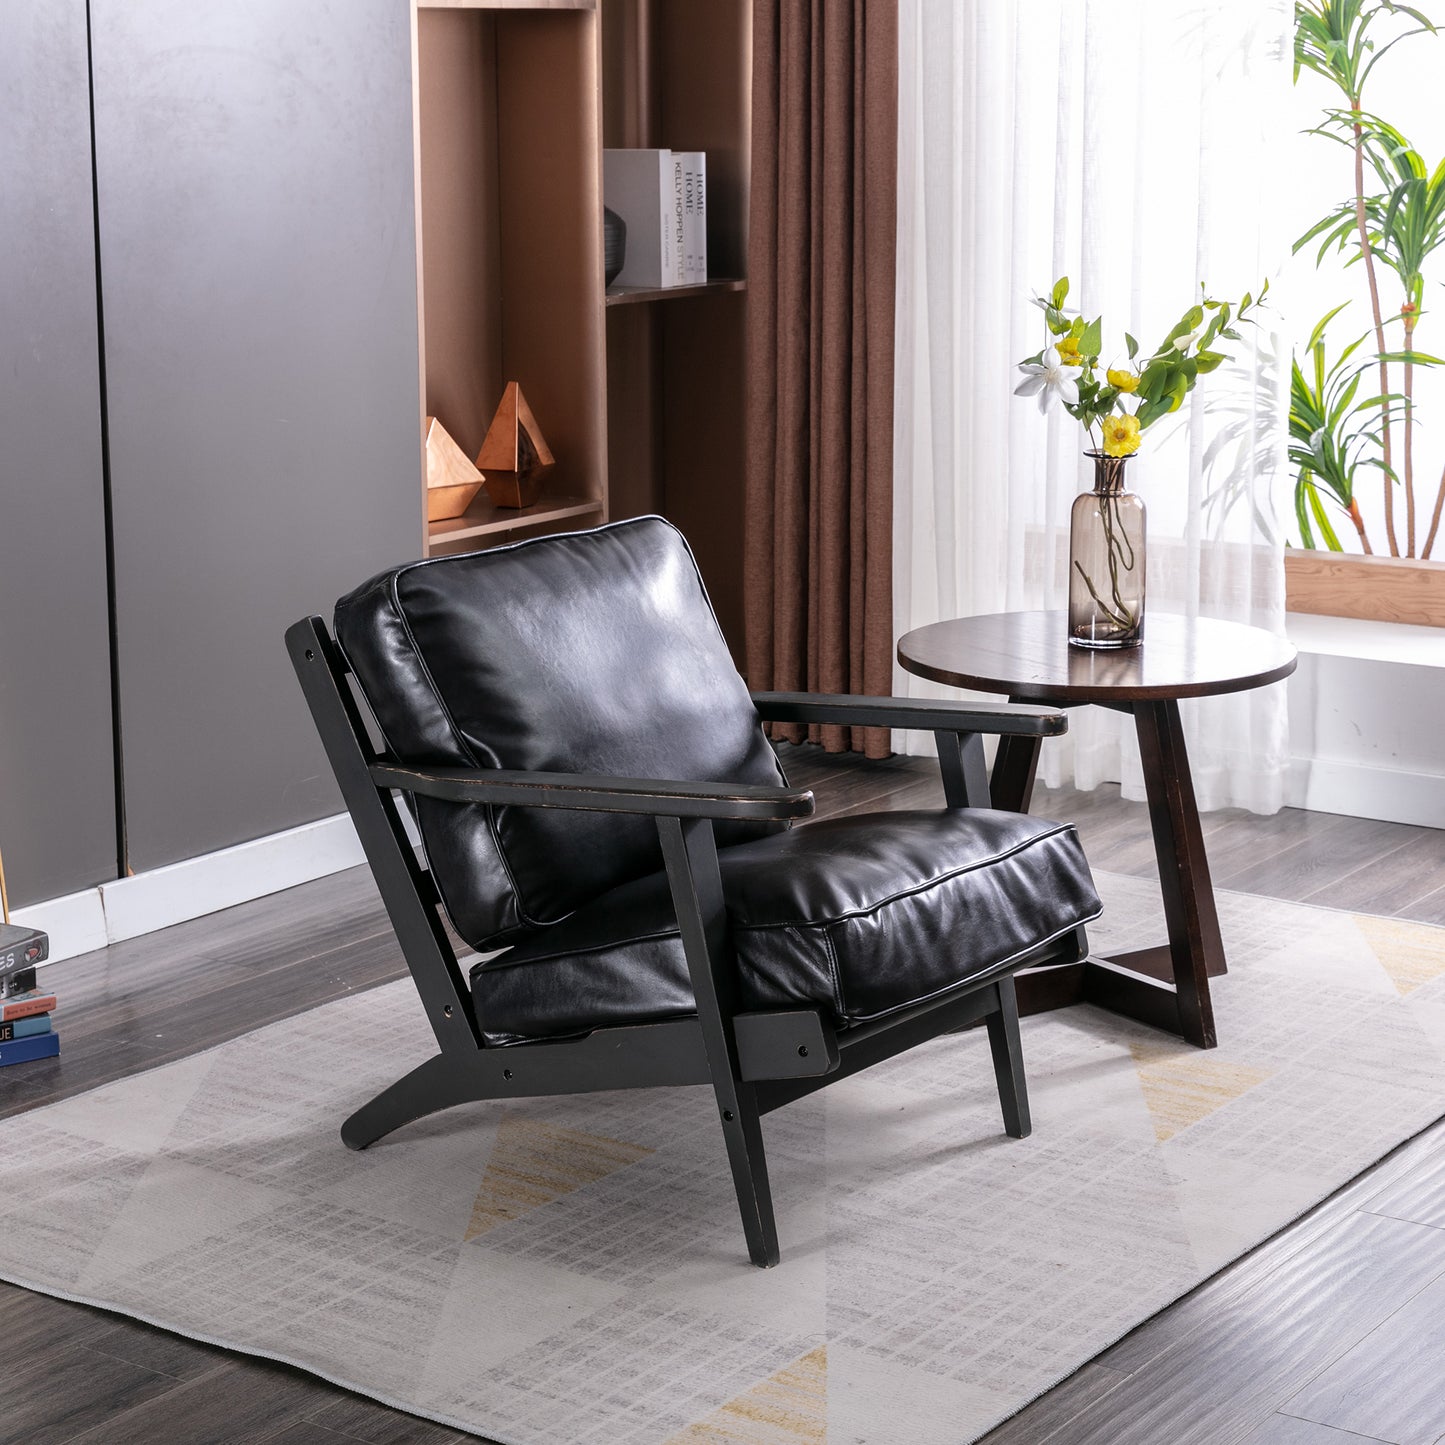 Solid Ash Wood wood  black antique painting removable cushion arm chair, mid-century sustainable PU leather accent chair